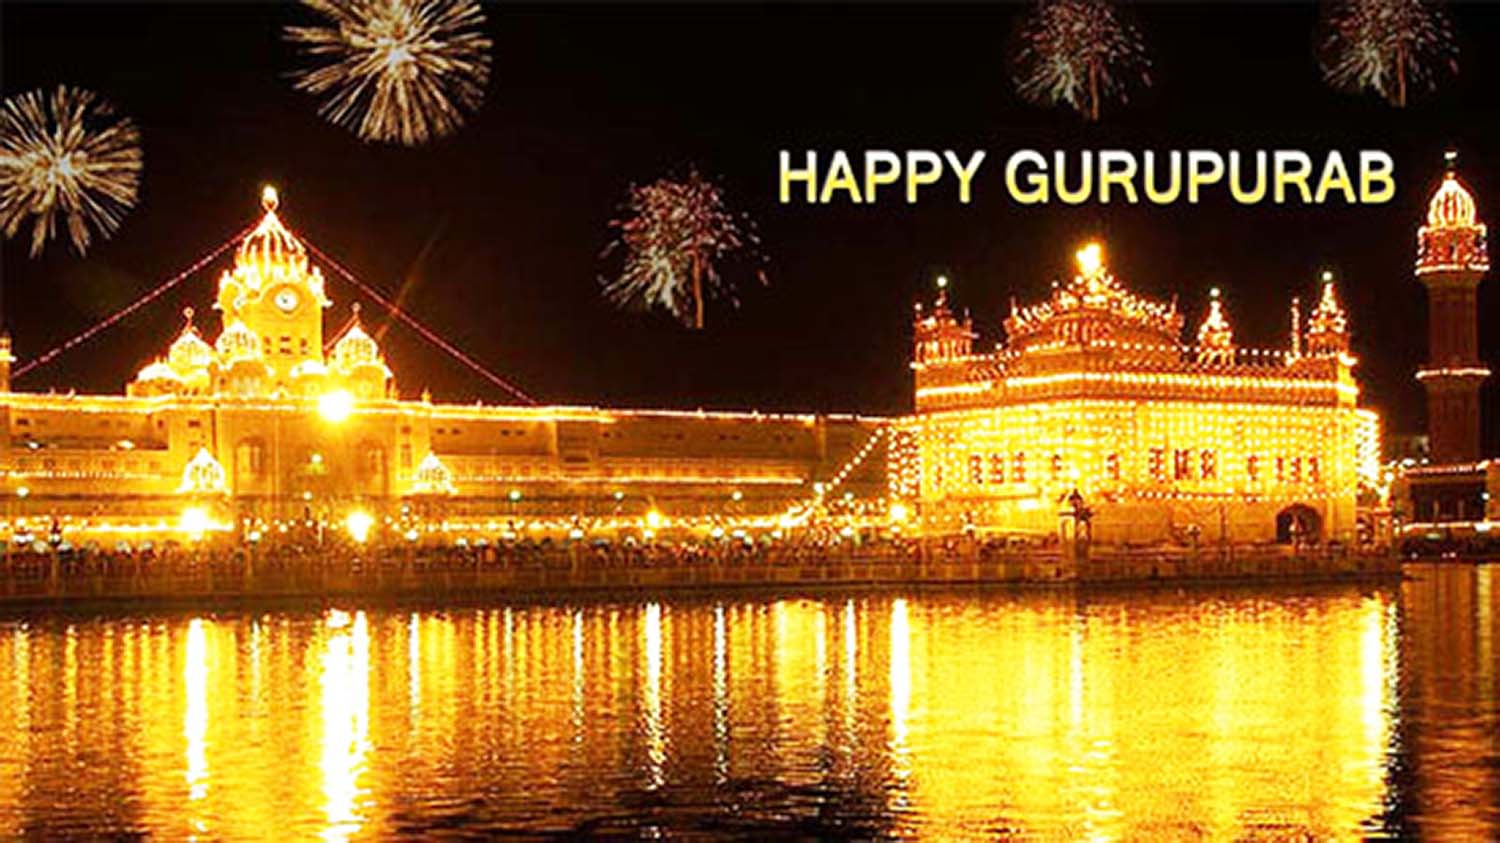 Happy Gurupurab Images HD, Pictures, Wallpapers and 